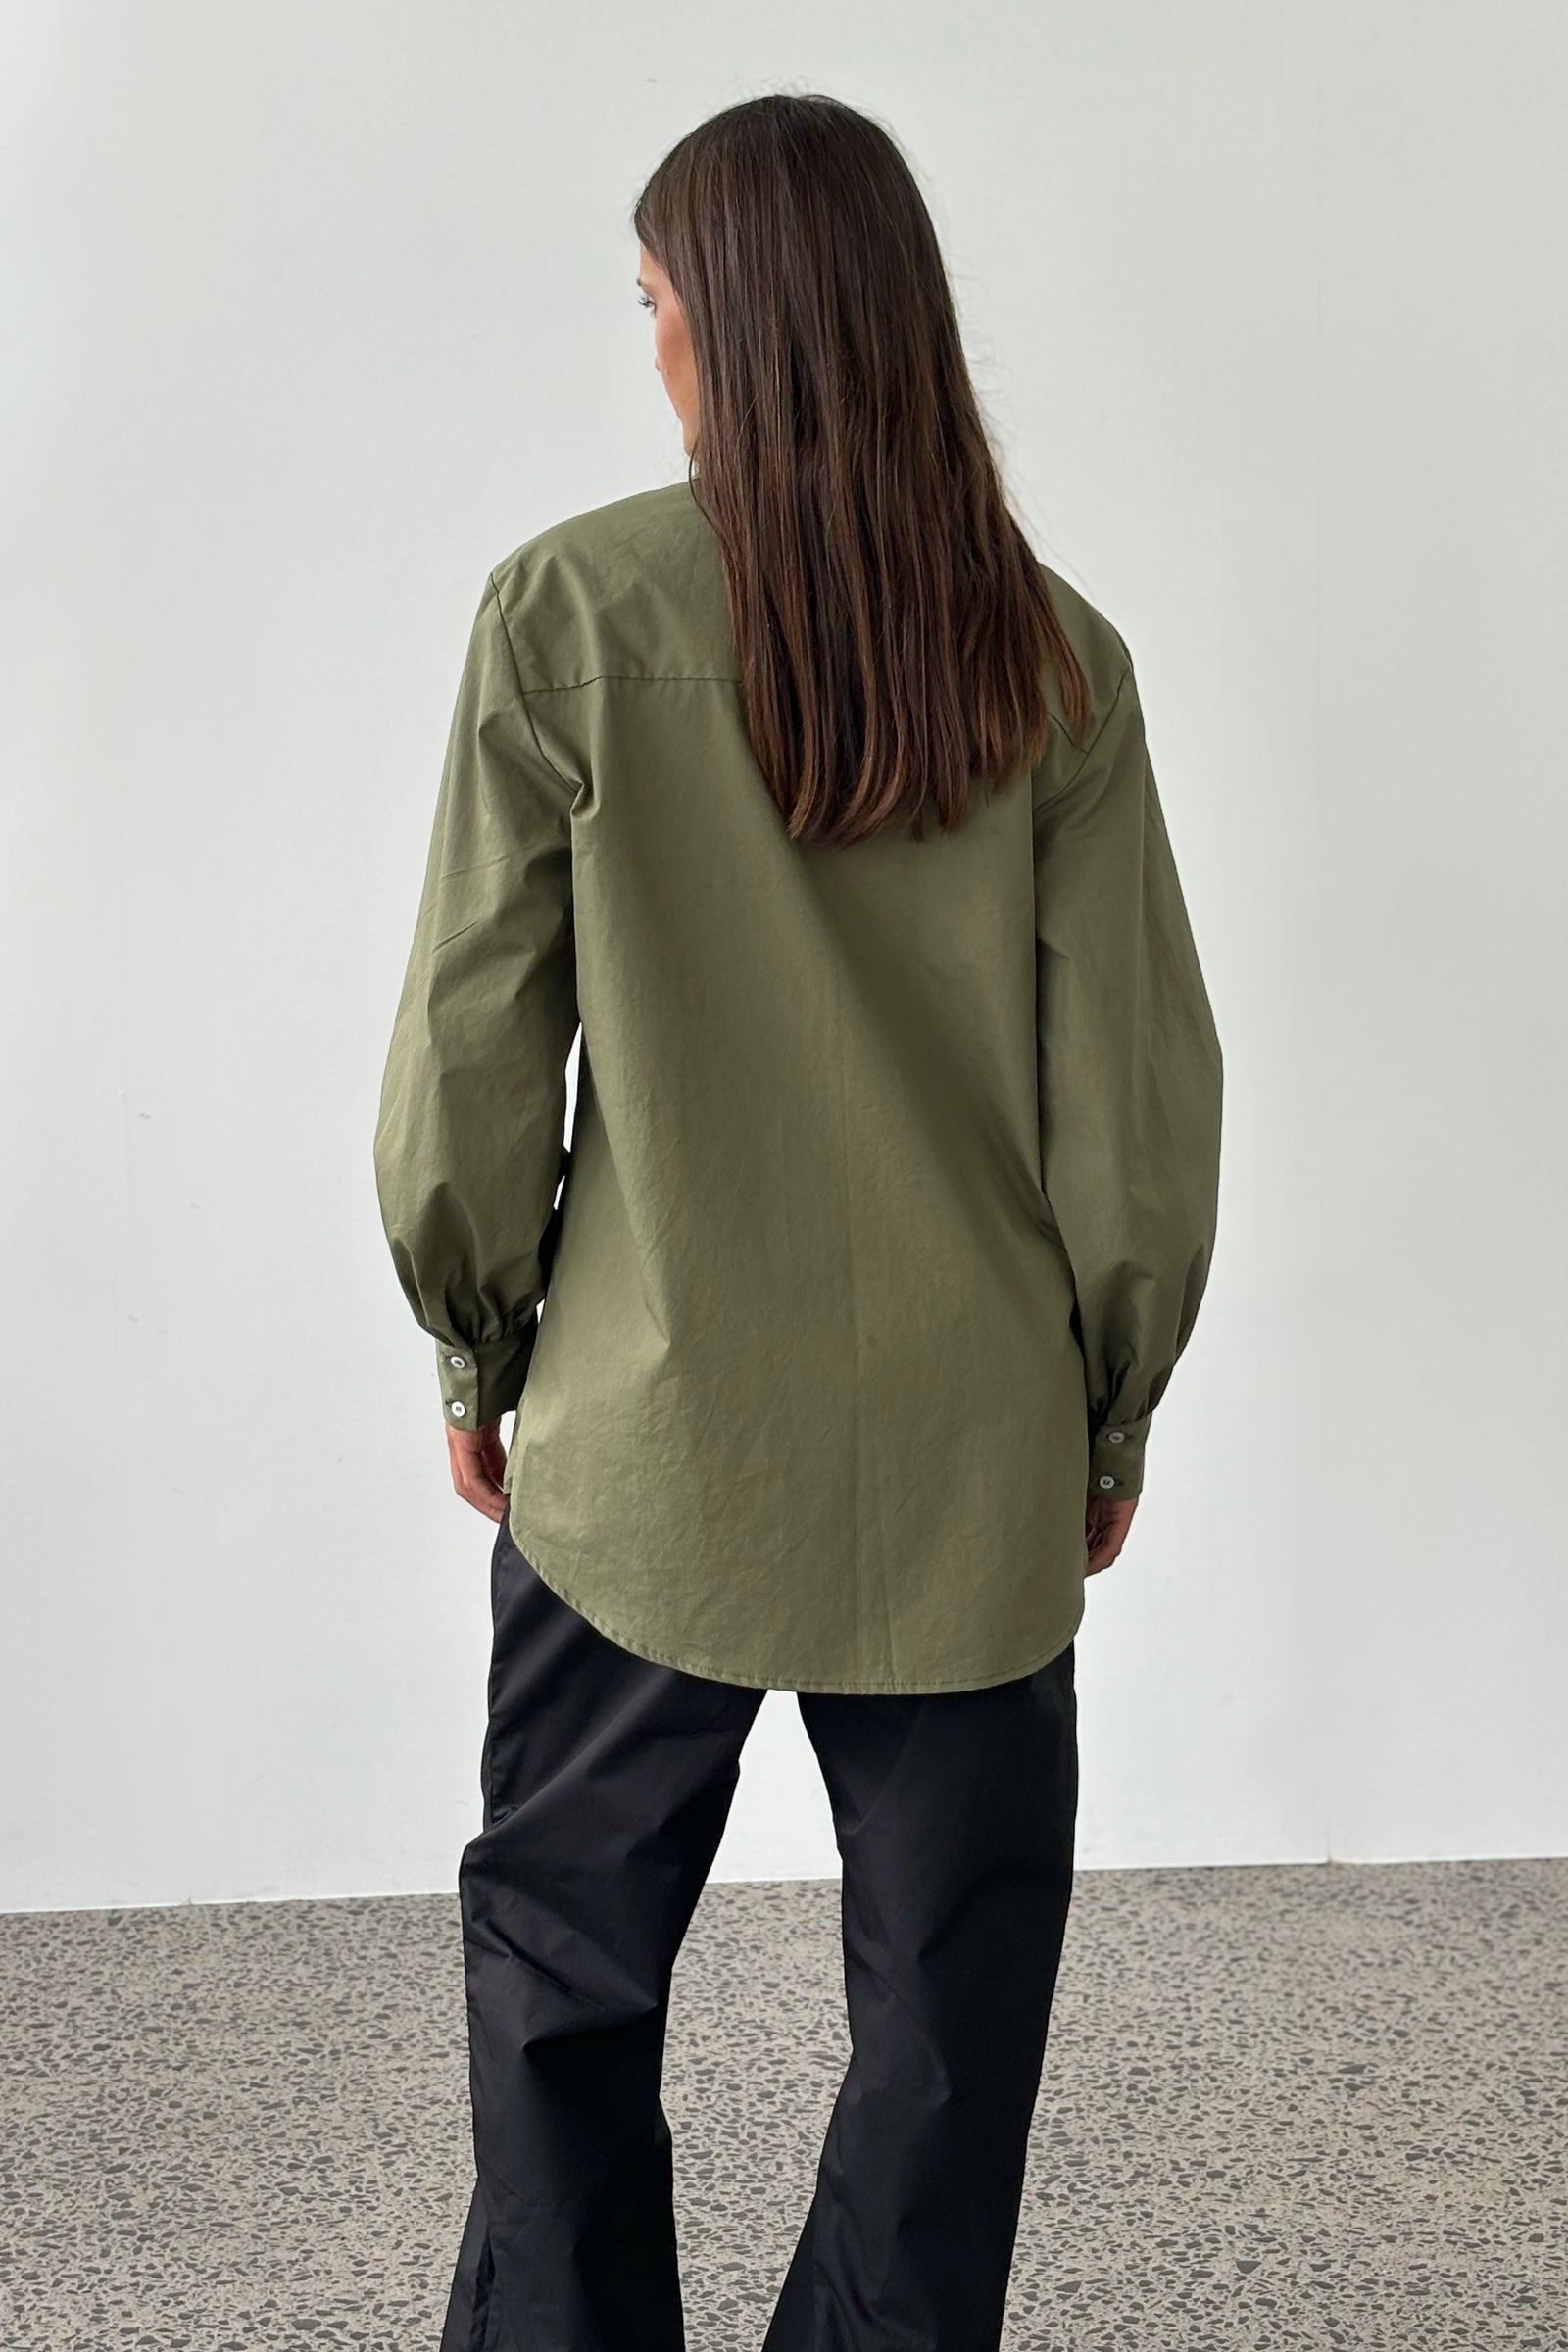 Mes Cotton Overshirt in Olive